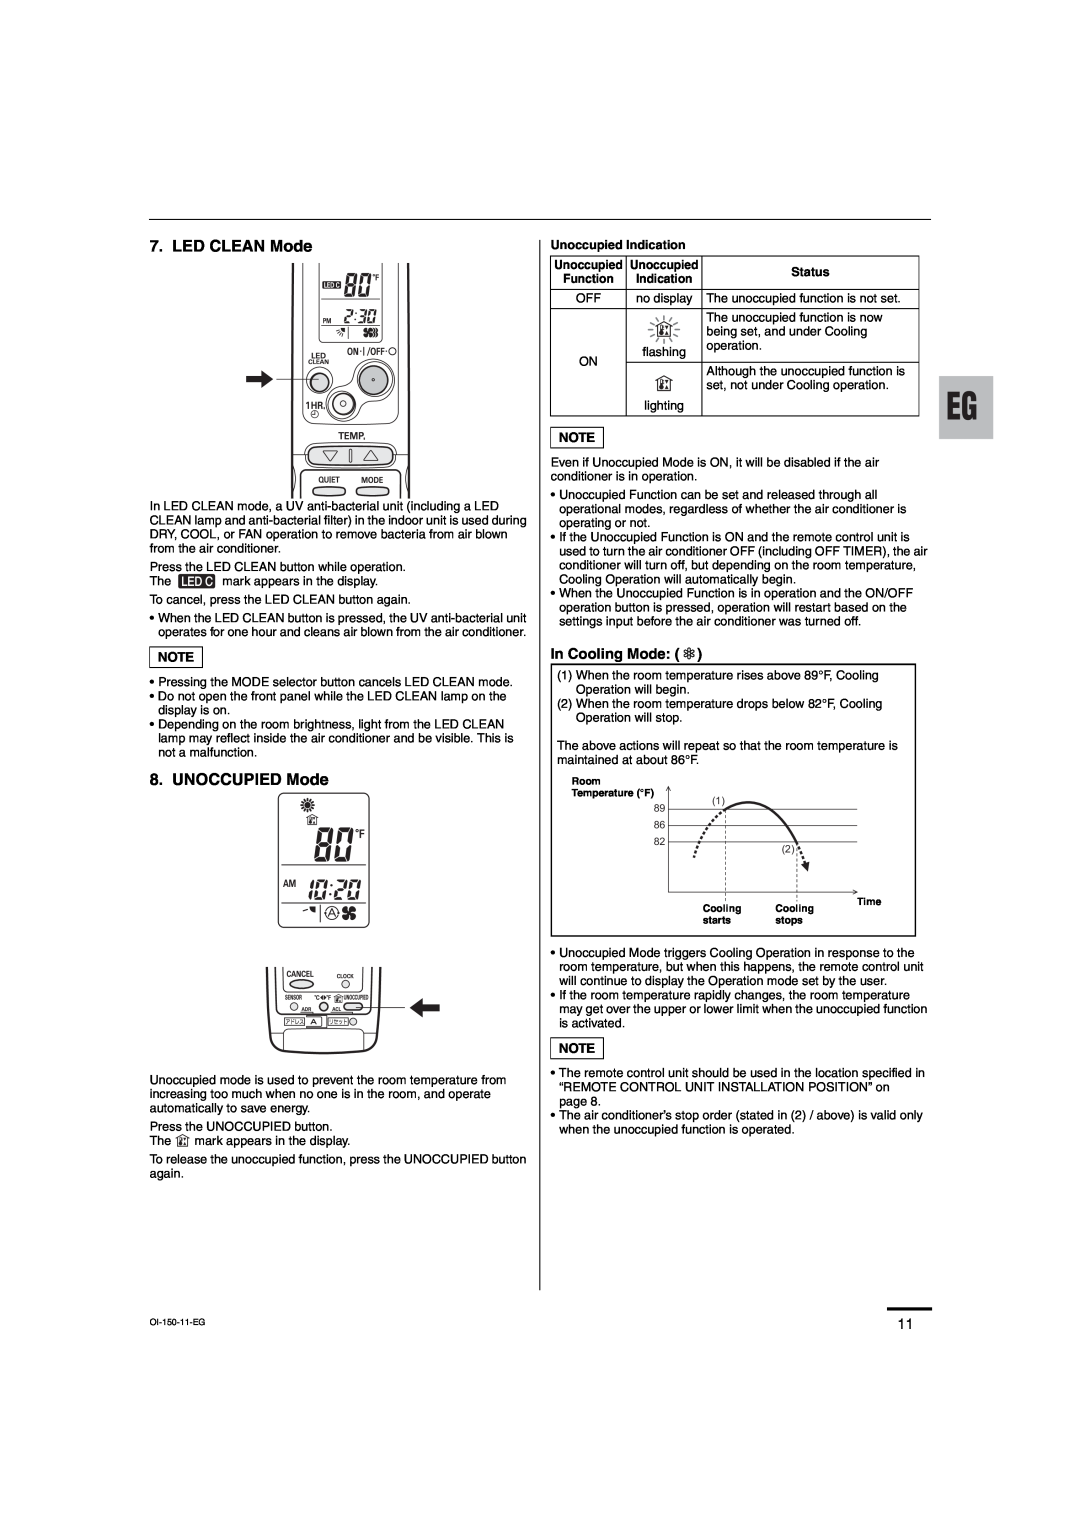 Sanyo C3682, C3082 service manual LED CLEAN Mode, UNOCCUPIED Mode, In Cooling Mode 